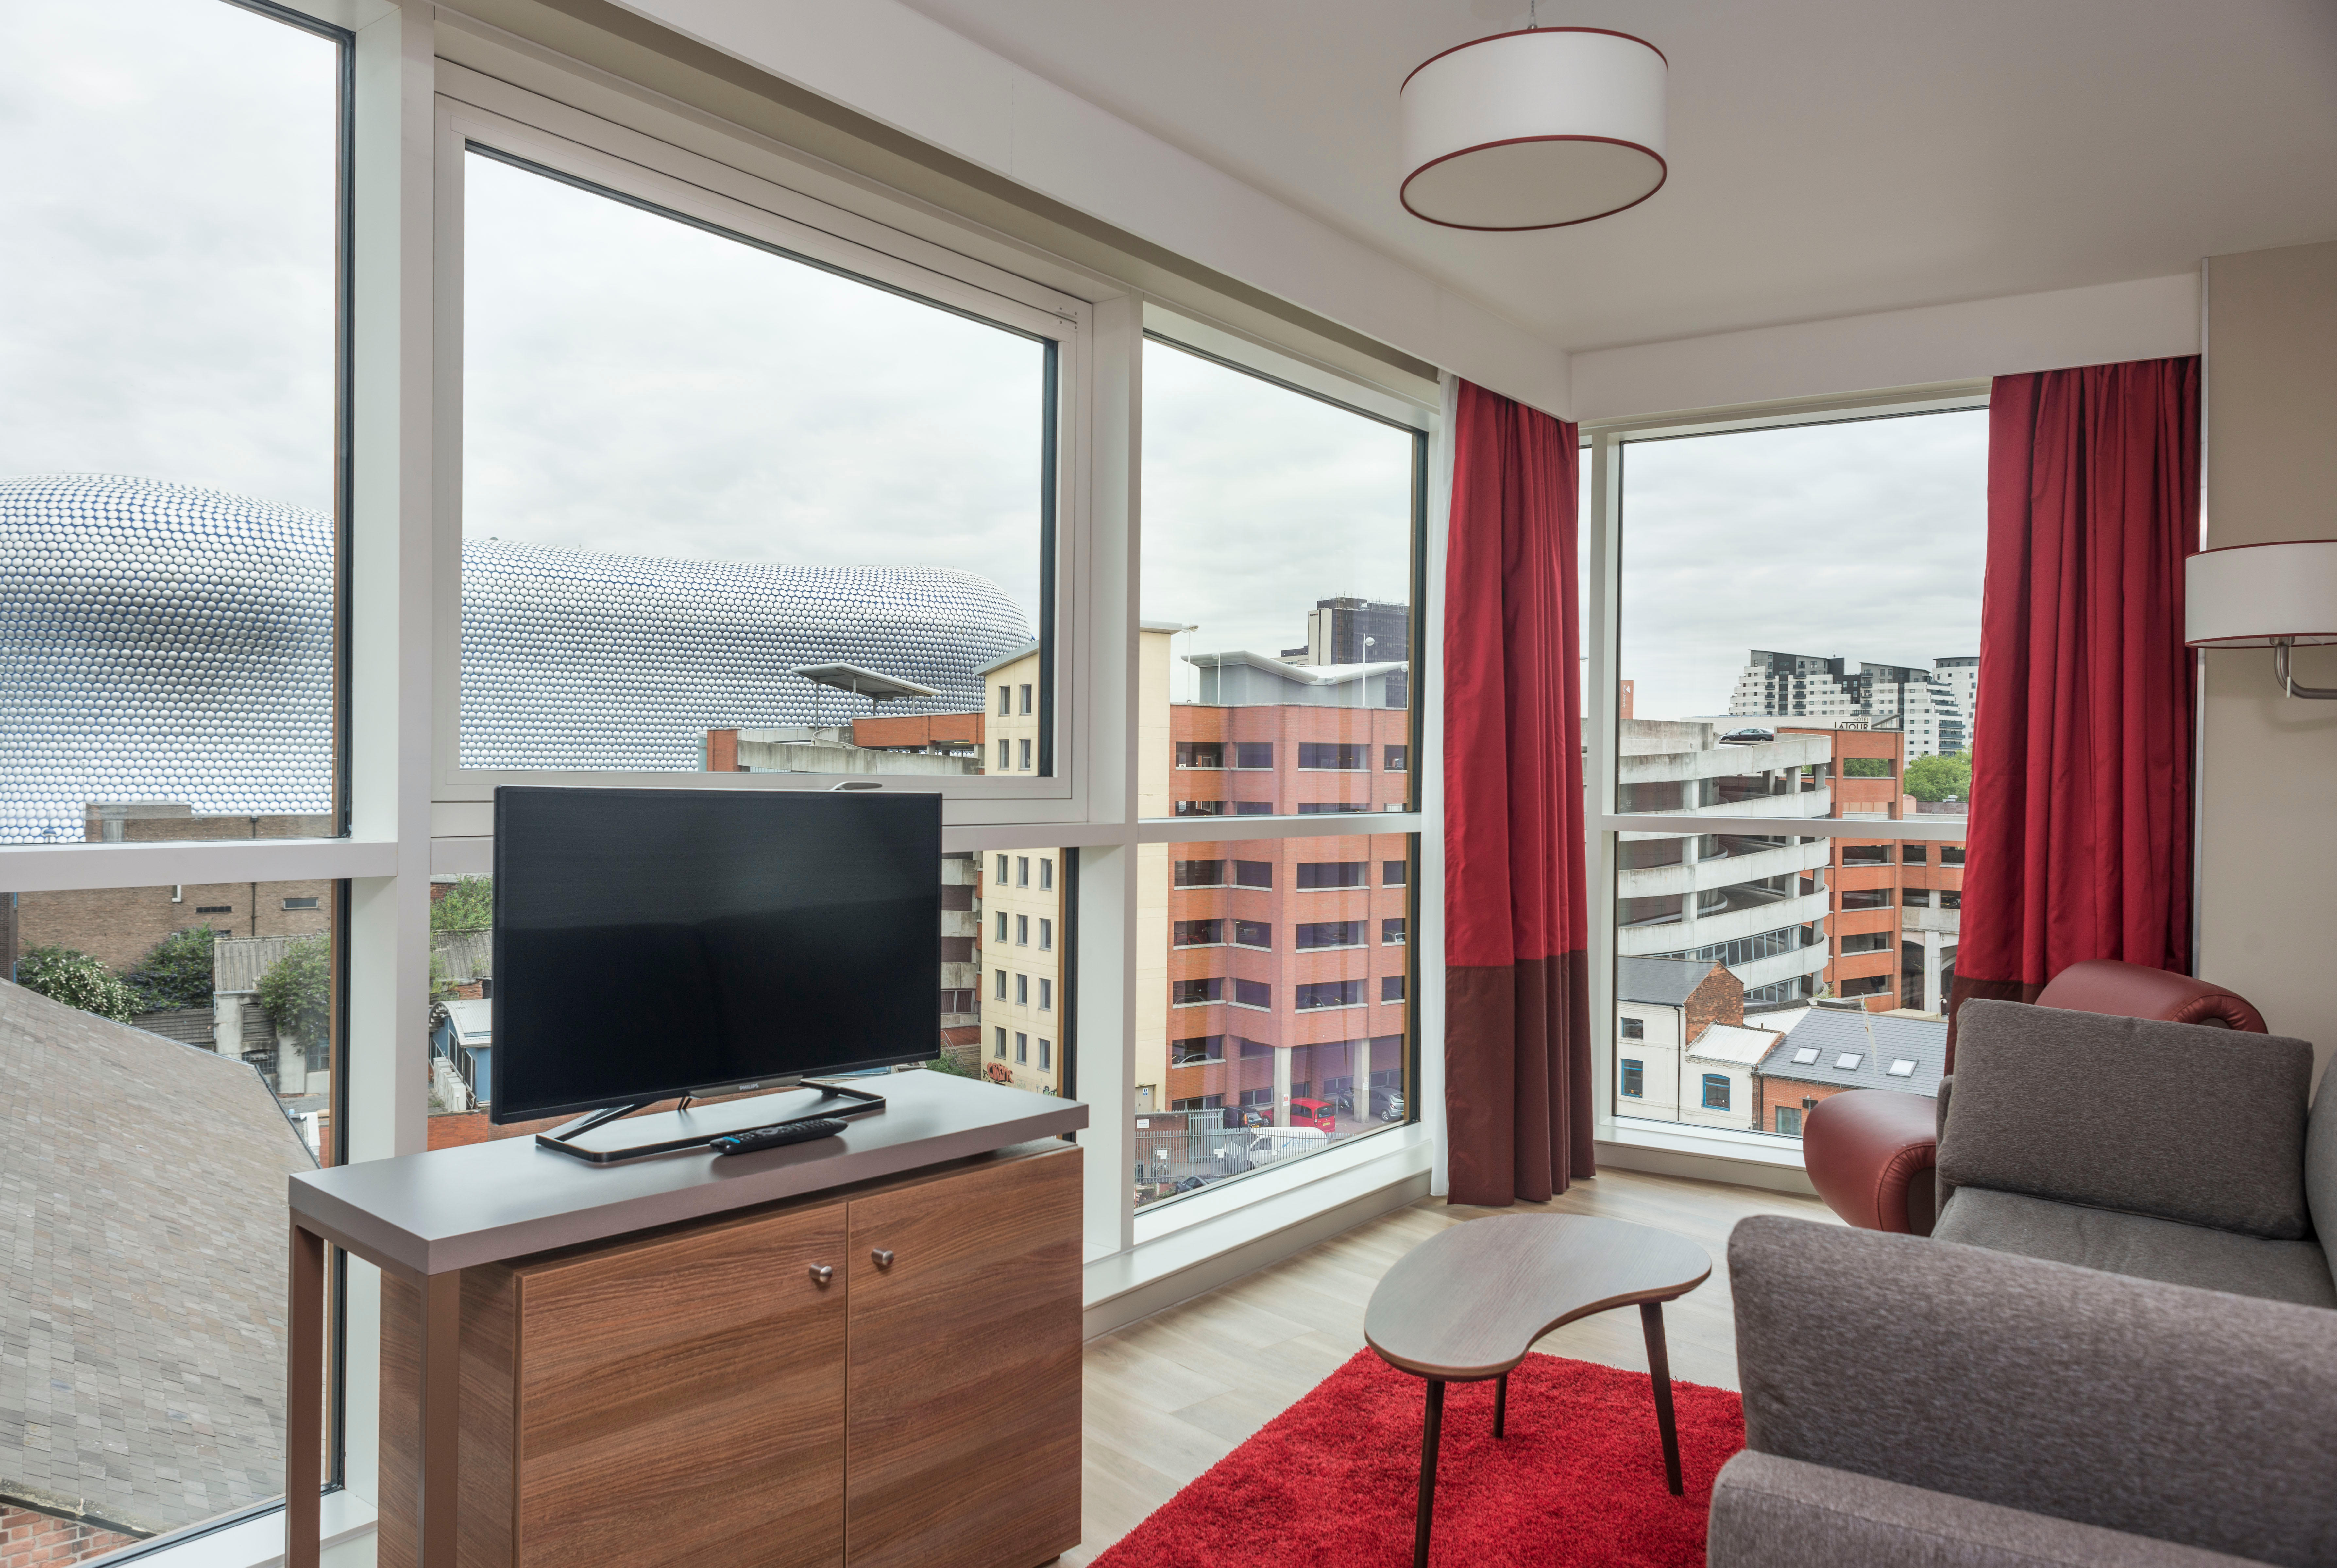 Premium 1 bedroom apartment with a view of the city